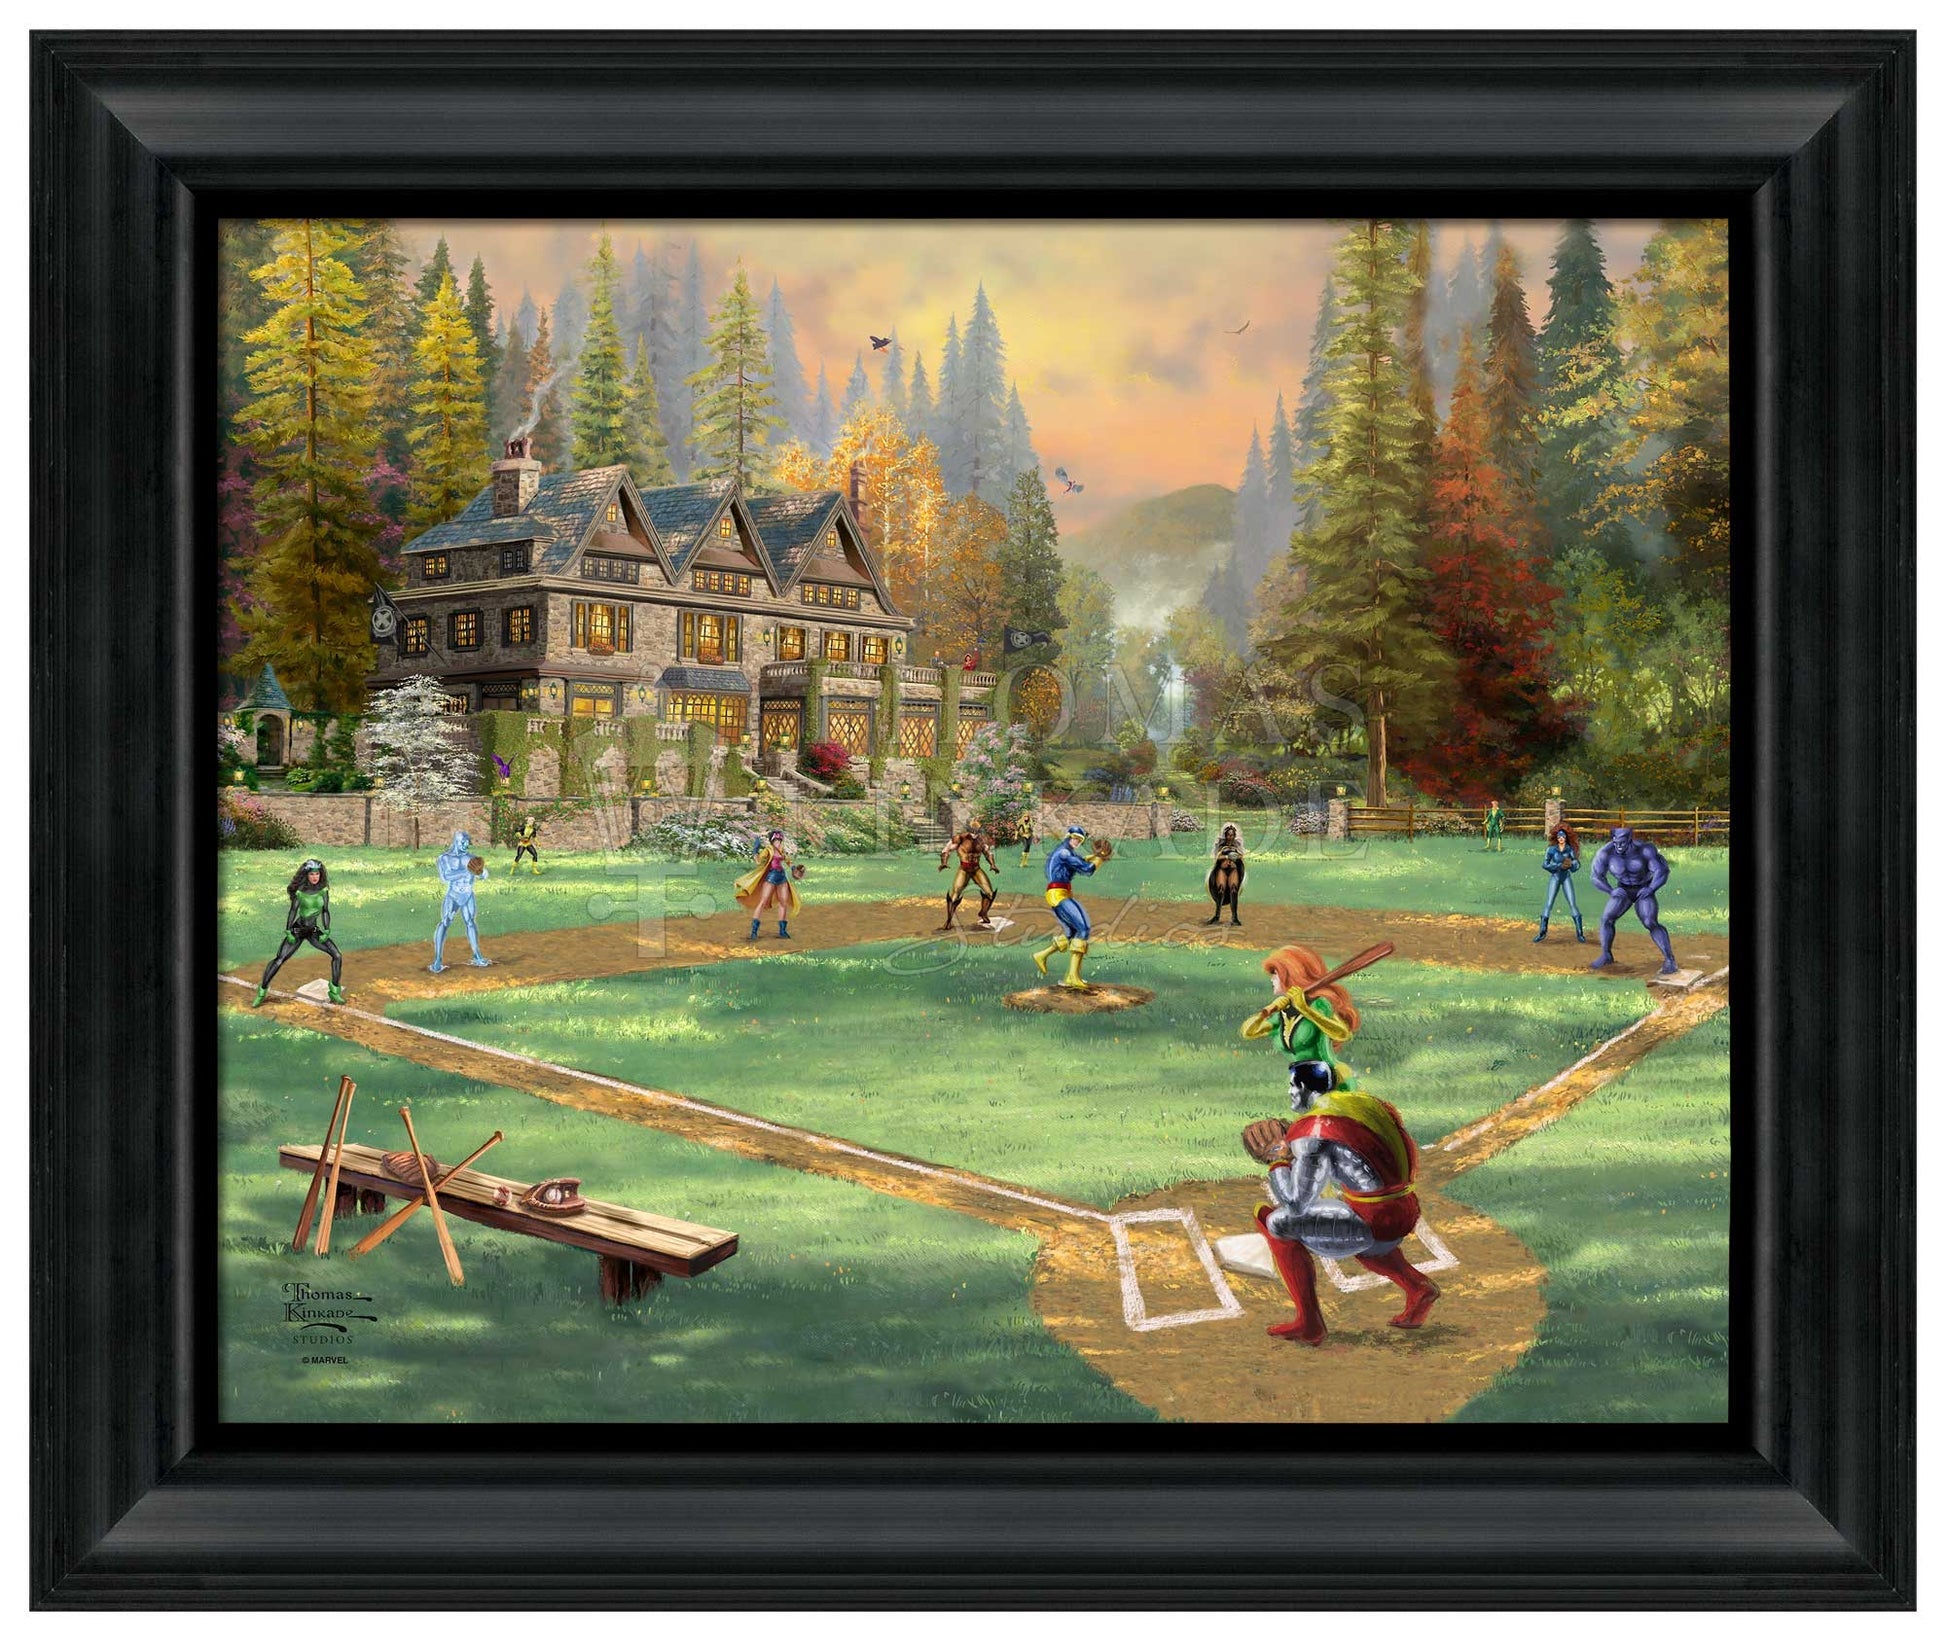 The Superheroes square off against each other in a friendly baseball game to build their teamwork further. Framed